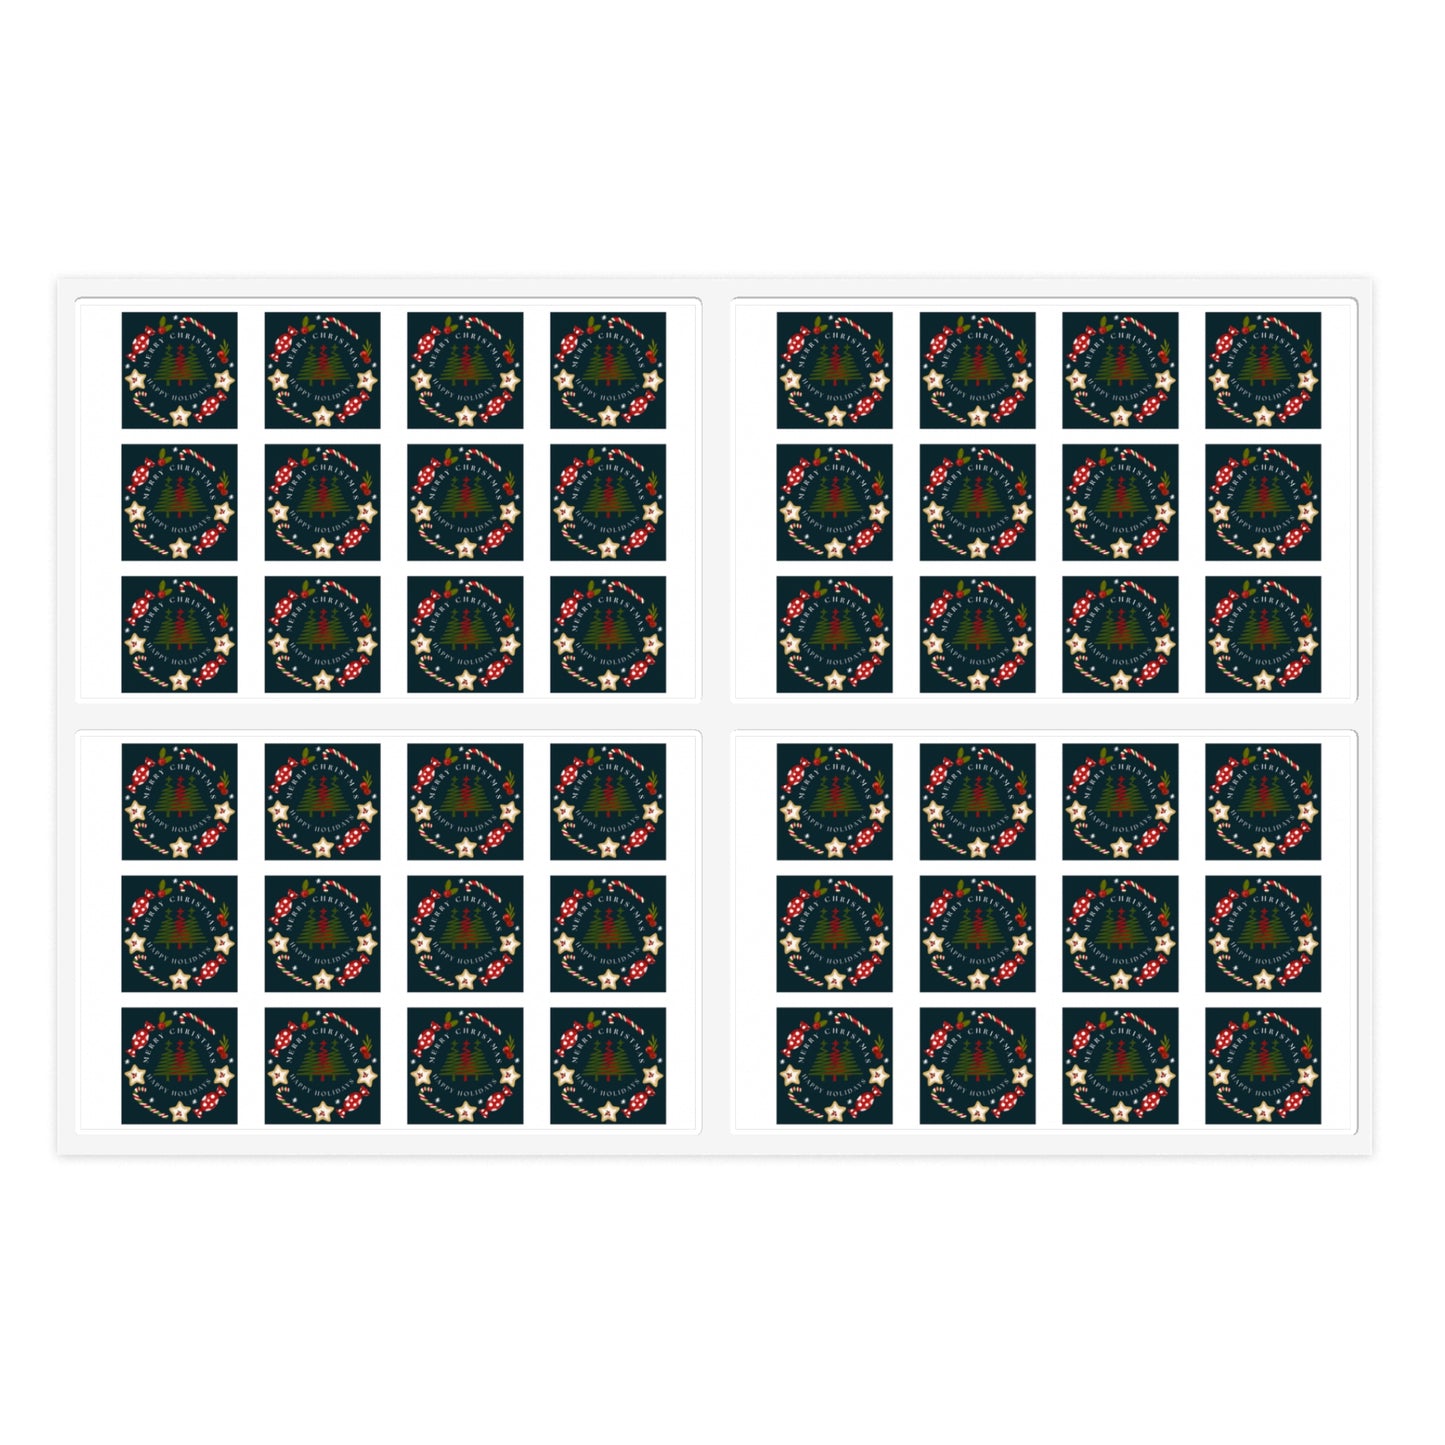 Merry Christmas & Happy Holidays Stickers (48 stickers per 11x8.5 size sheet)